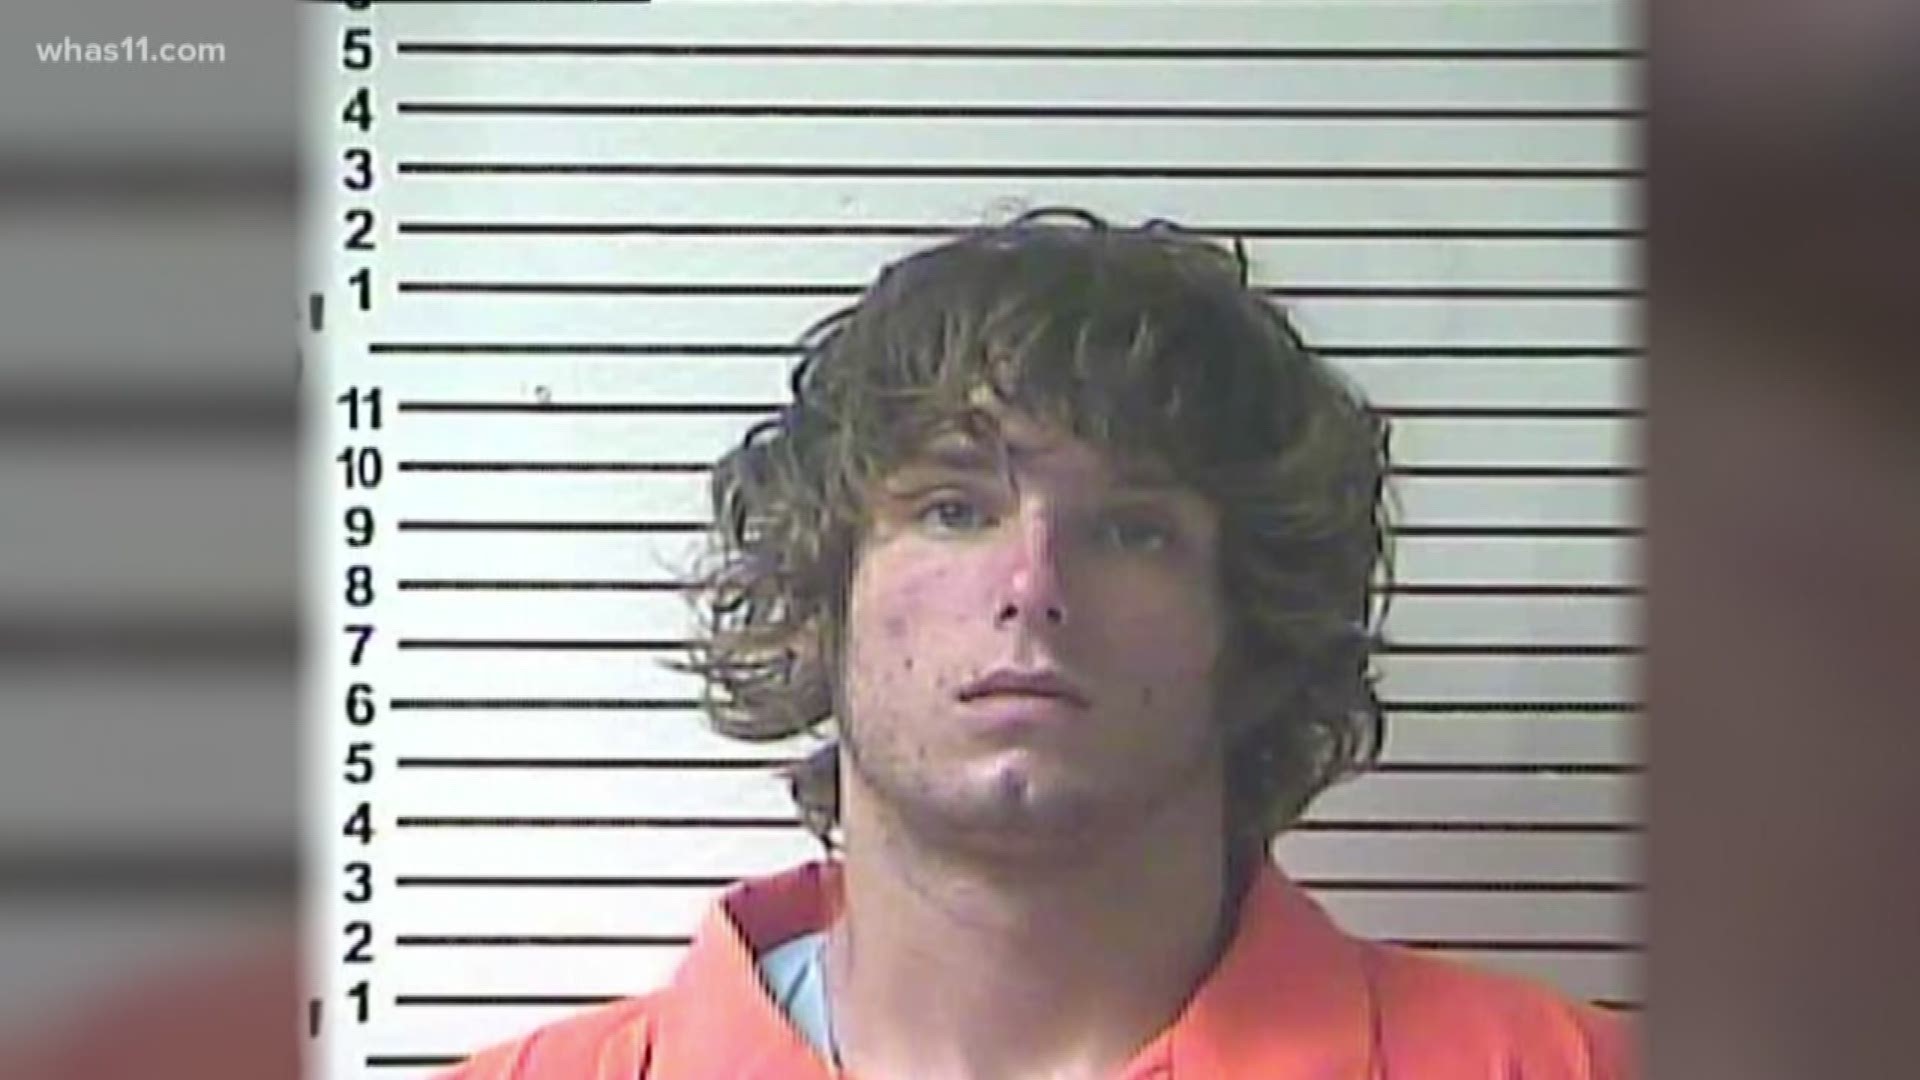 A man in Elizabethtown facing murder charges after police say he beat a woman to death.